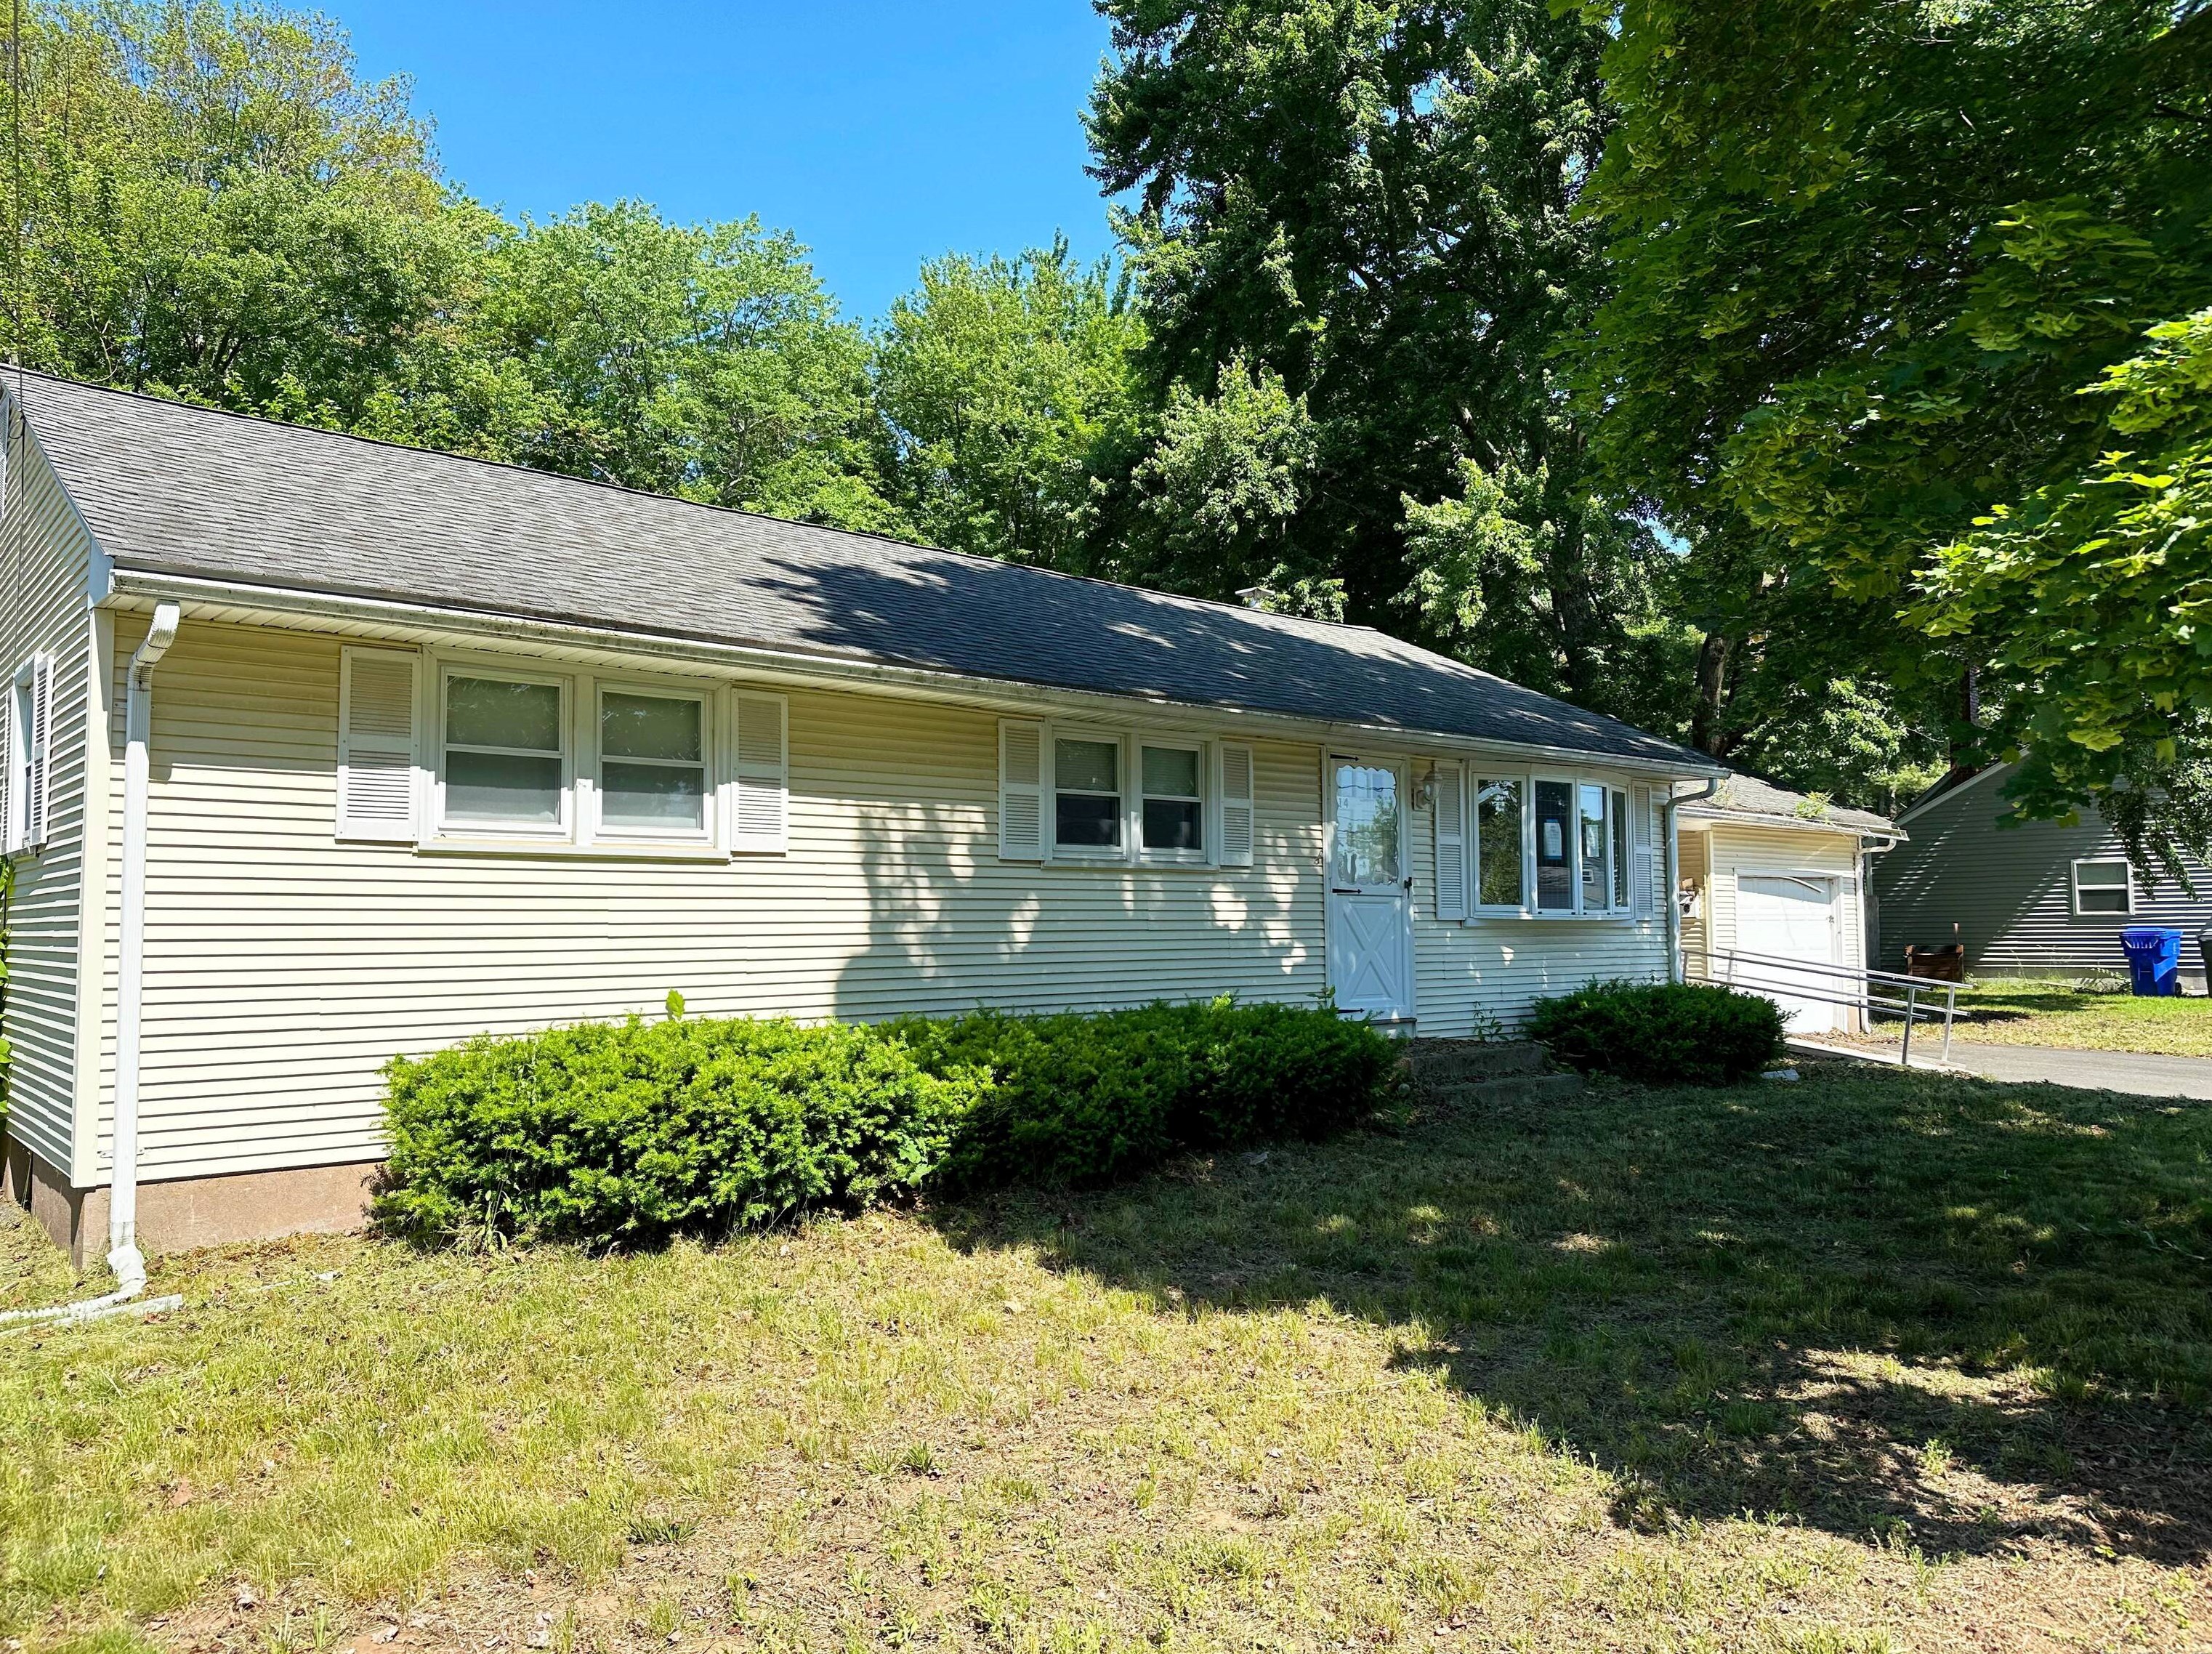 14 Alaimo Dr, Enfield, CT 06082